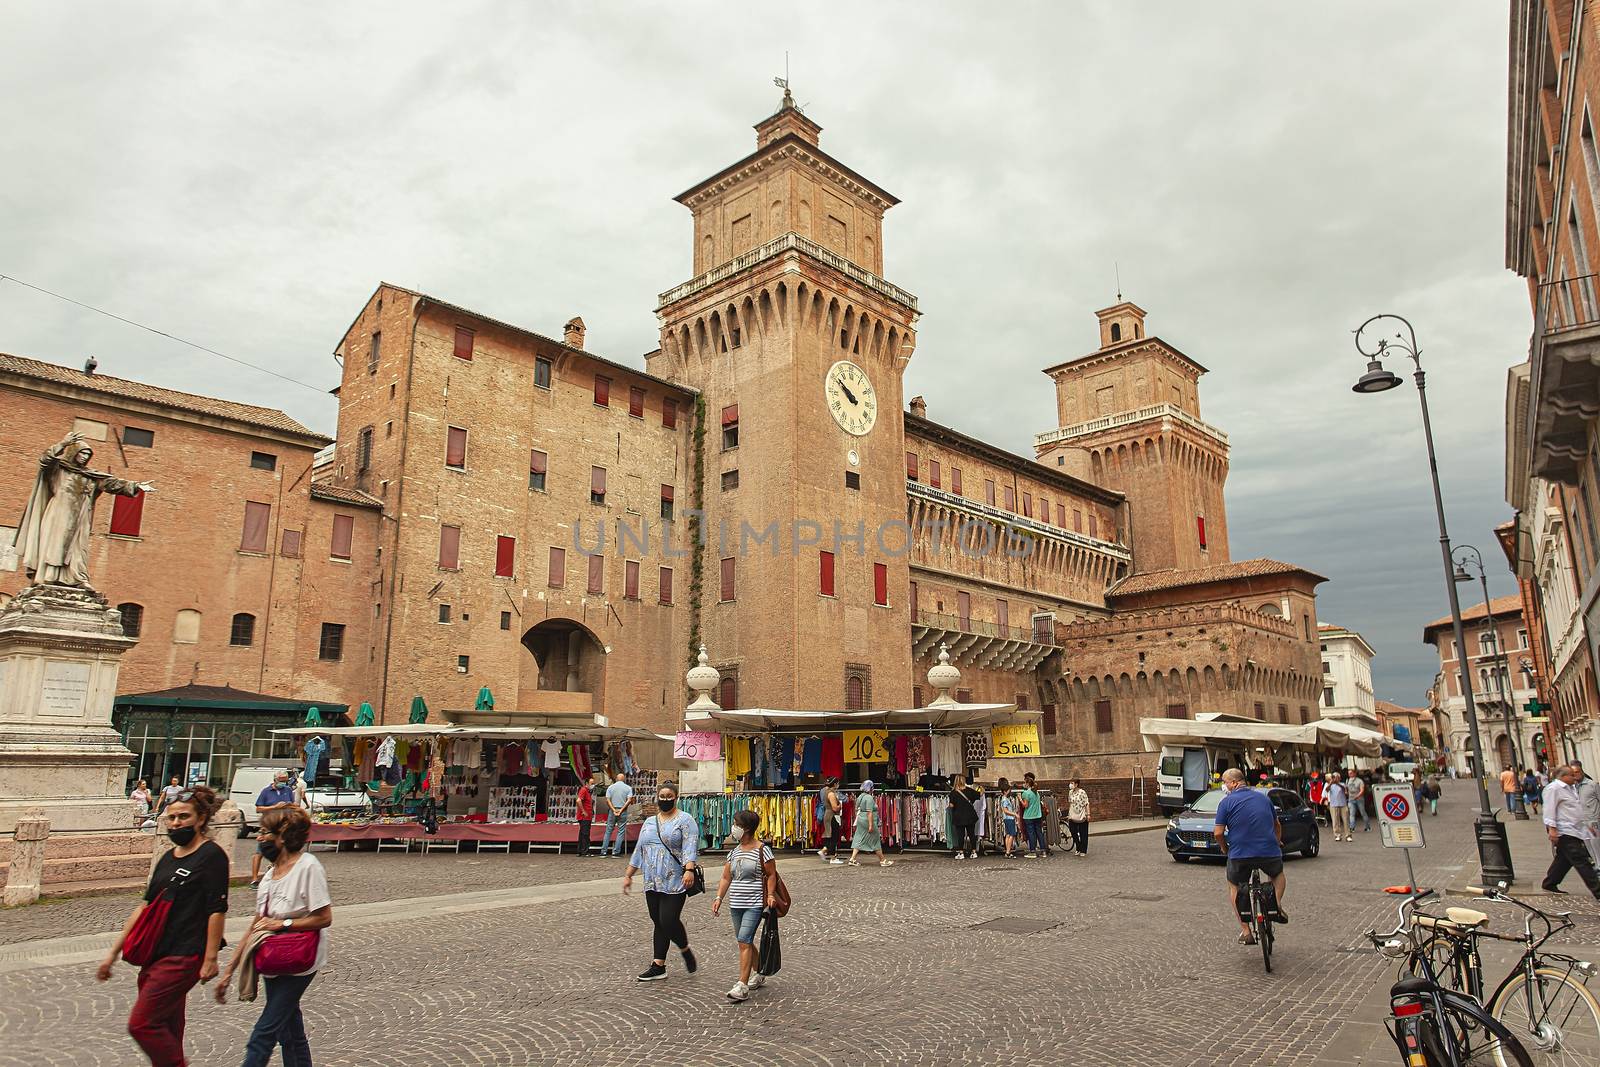 FERRARA, ITALY 29 JULY 2020 : View of the castle of Ferrara of three quarters with people strolling in front of it